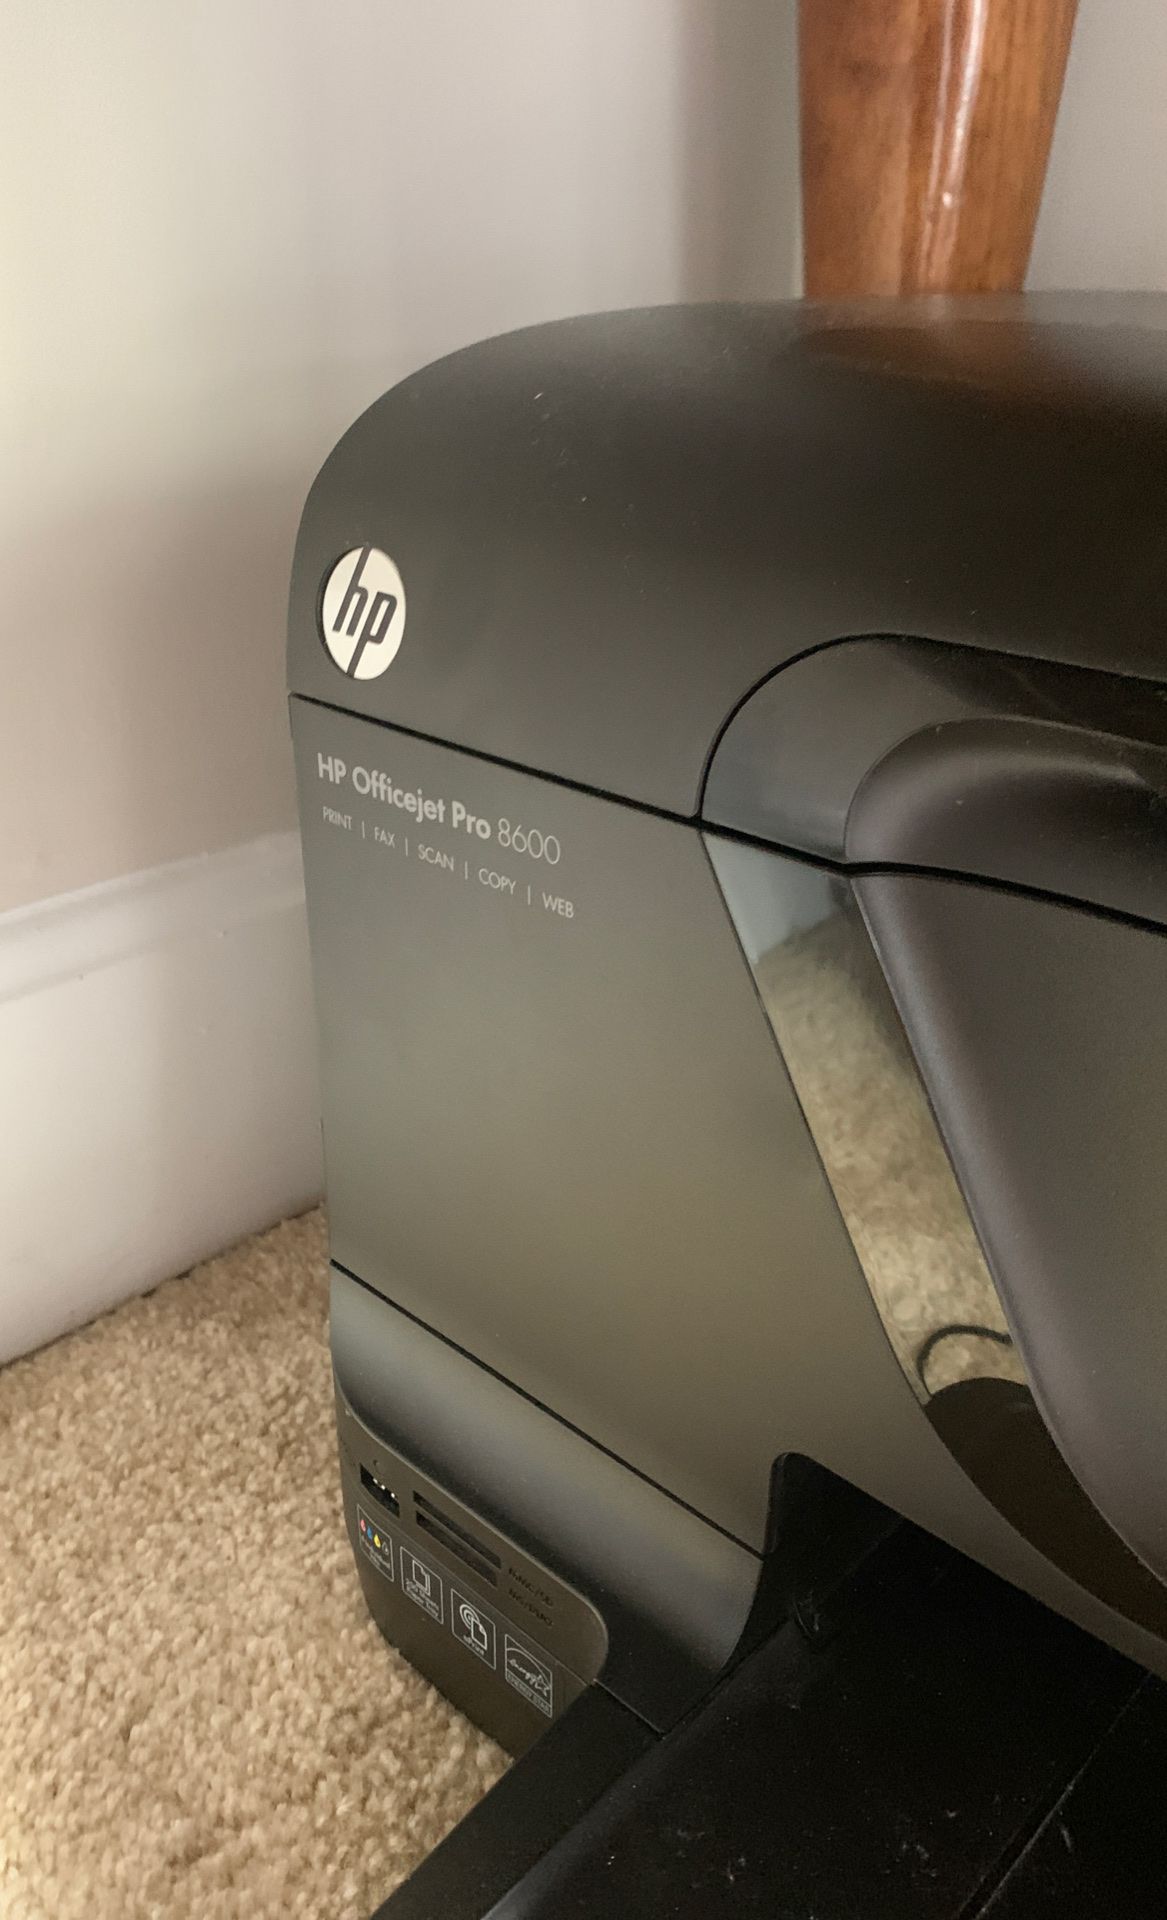 HP OfficeJet Pro 8600 with extra cartridges